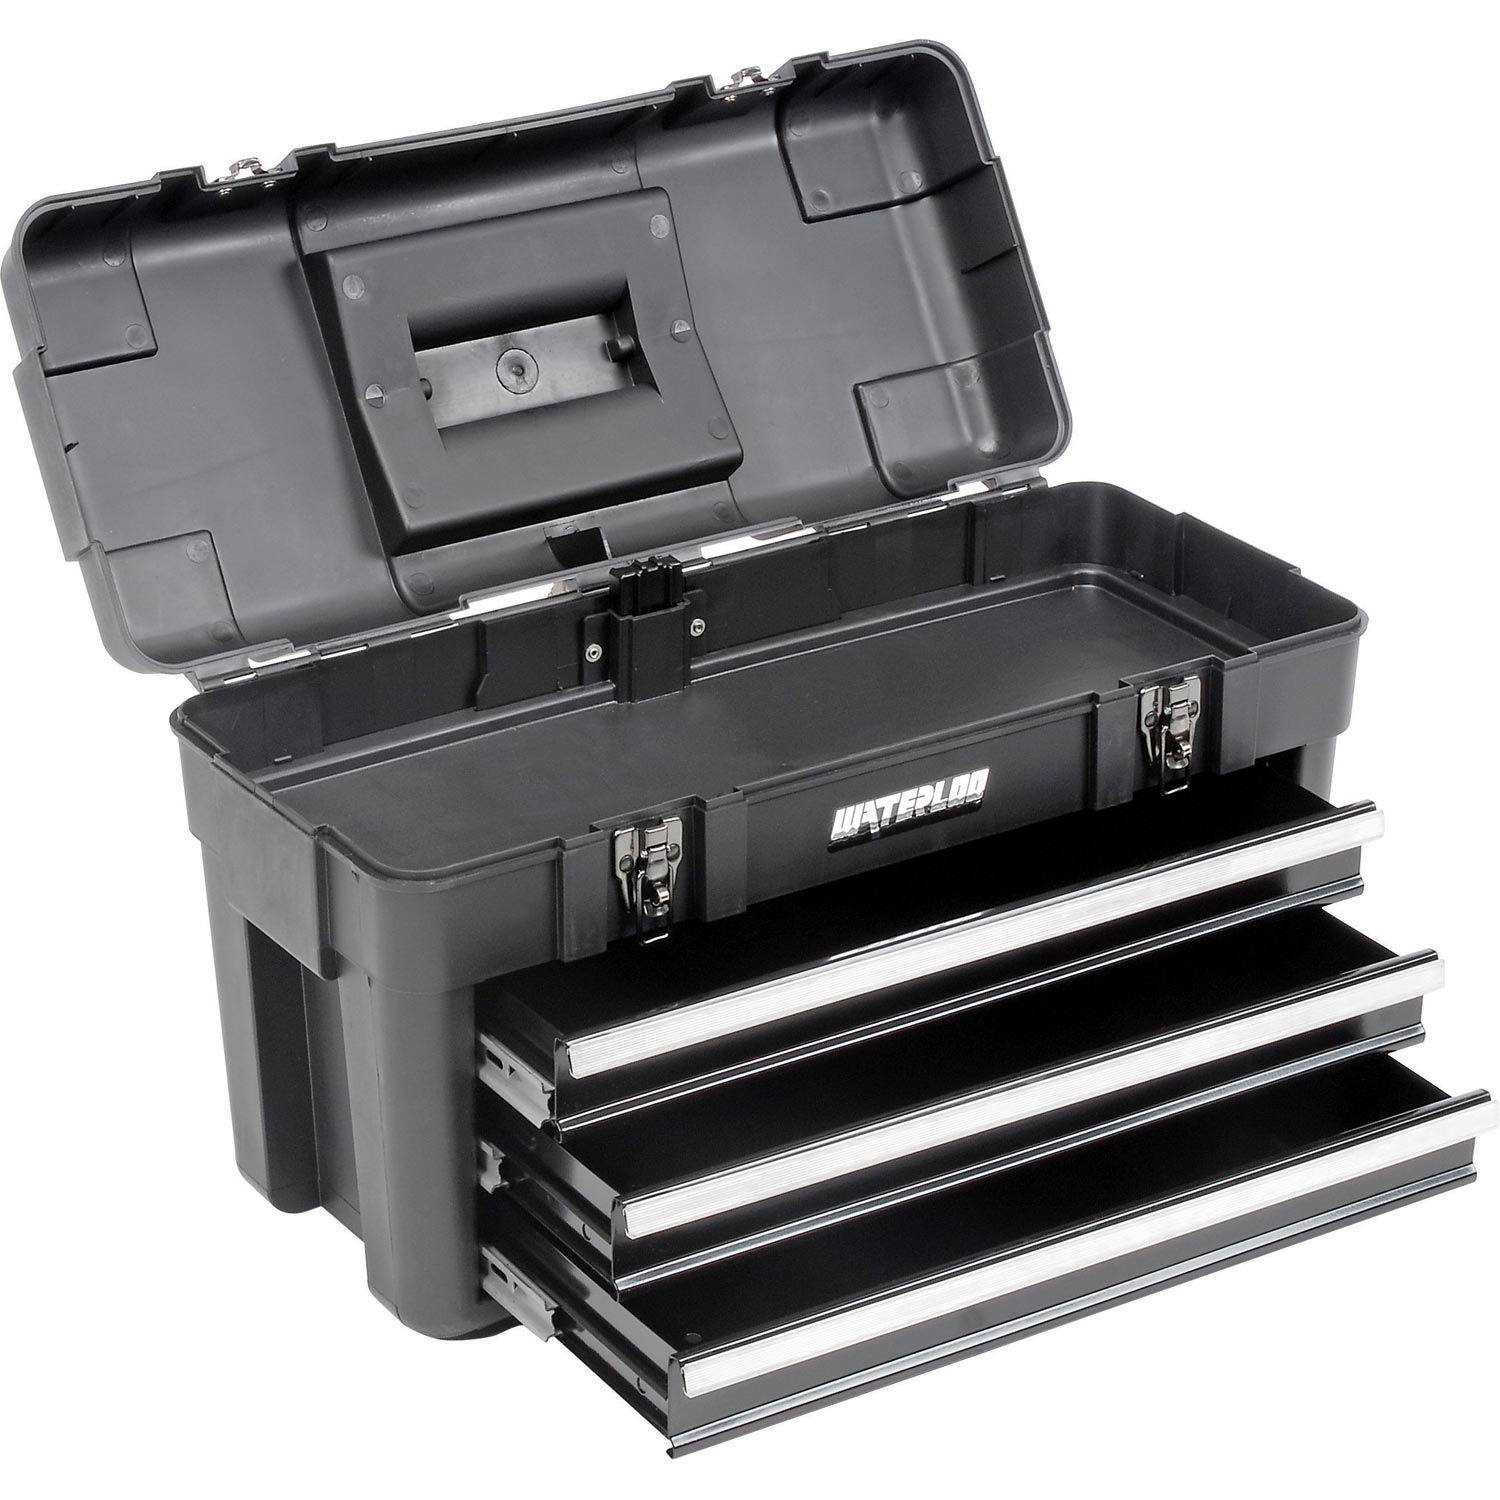 Tool Boxes Storage And Organization Tool Boxes Waterloo Pp 2314bk